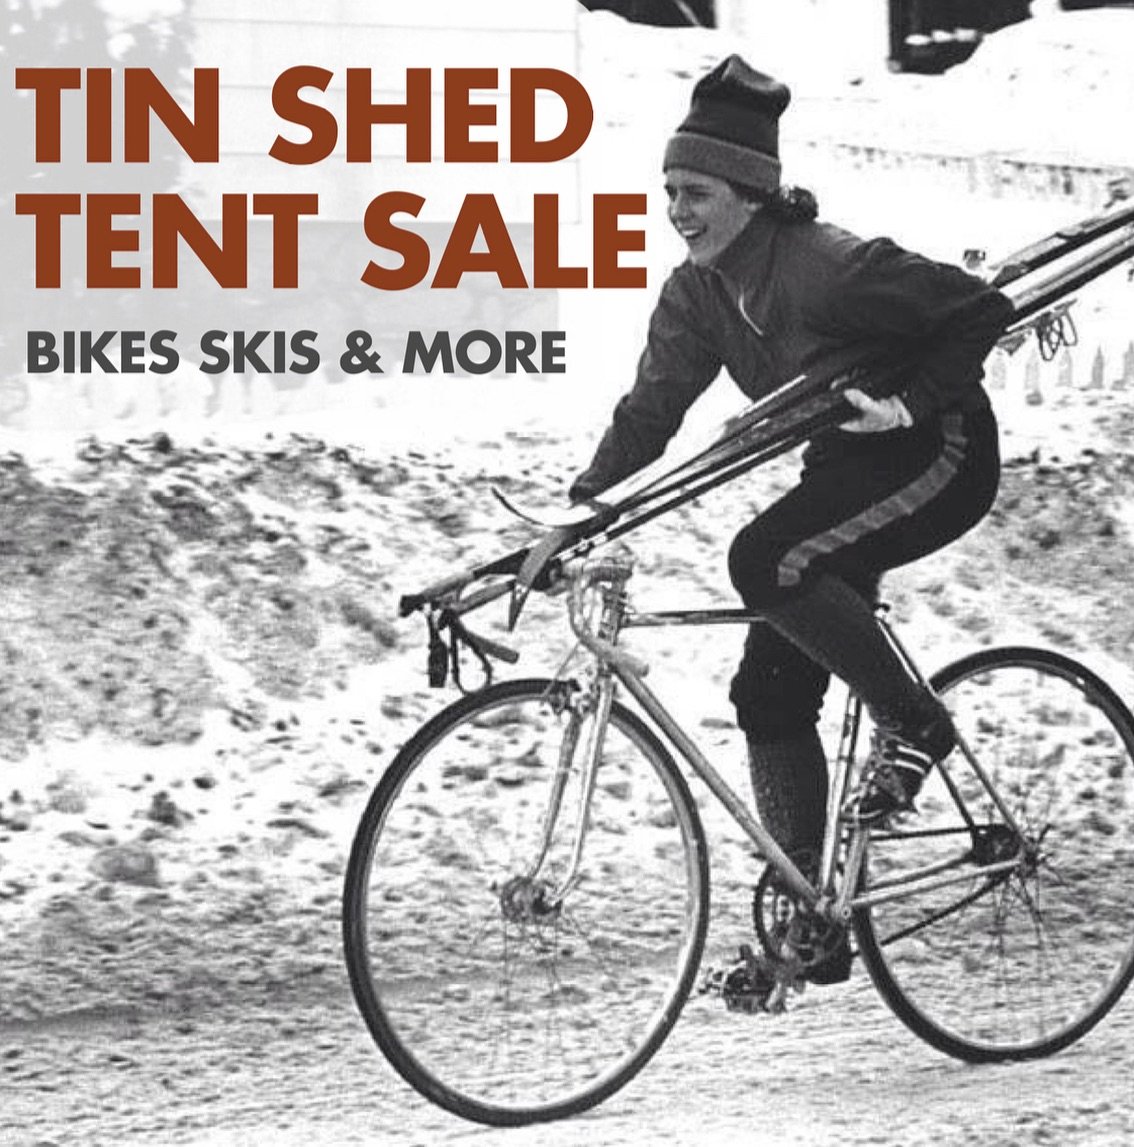 This weekend starting today! Come down and shop deals from @tinshedsports and grab some coffee and lunch while you&rsquo;re at it!